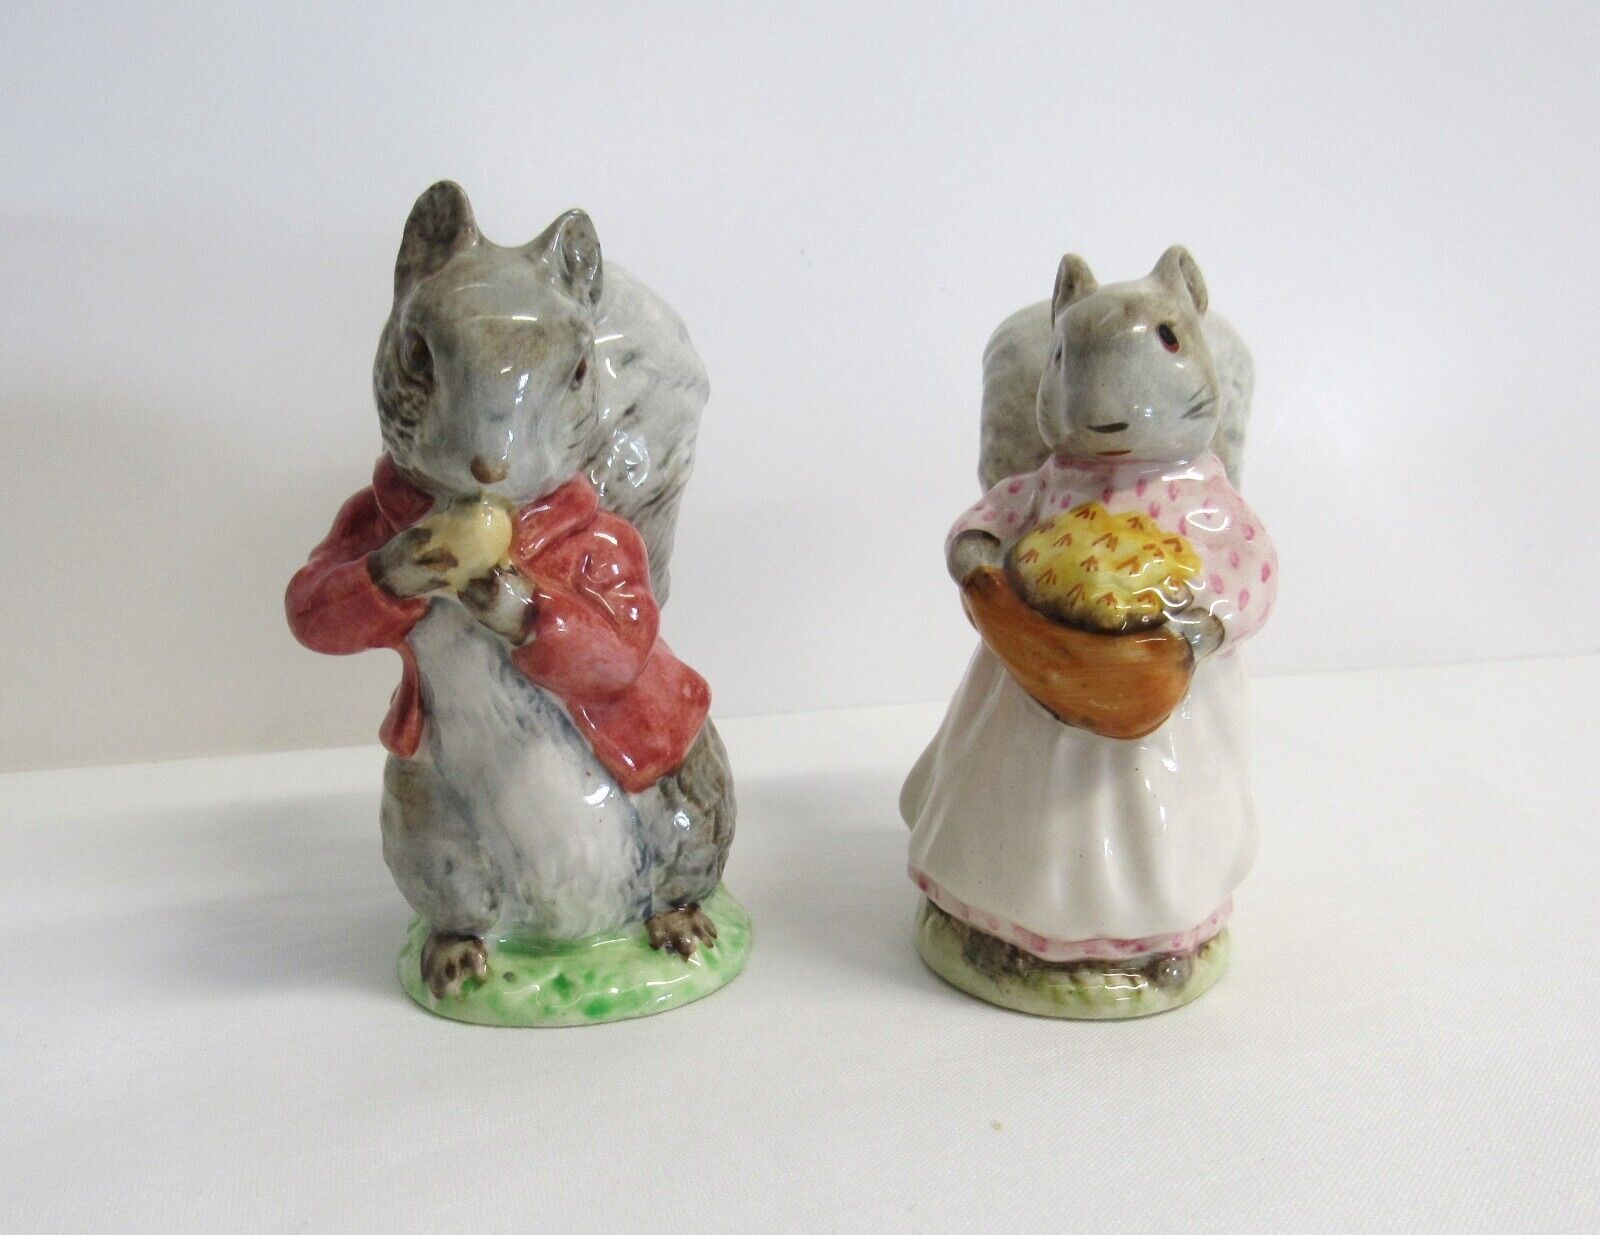 Beatrix Potter TIMMY TIPTOES 1948 and GOODY TIPTOES 1961 - Beswick England